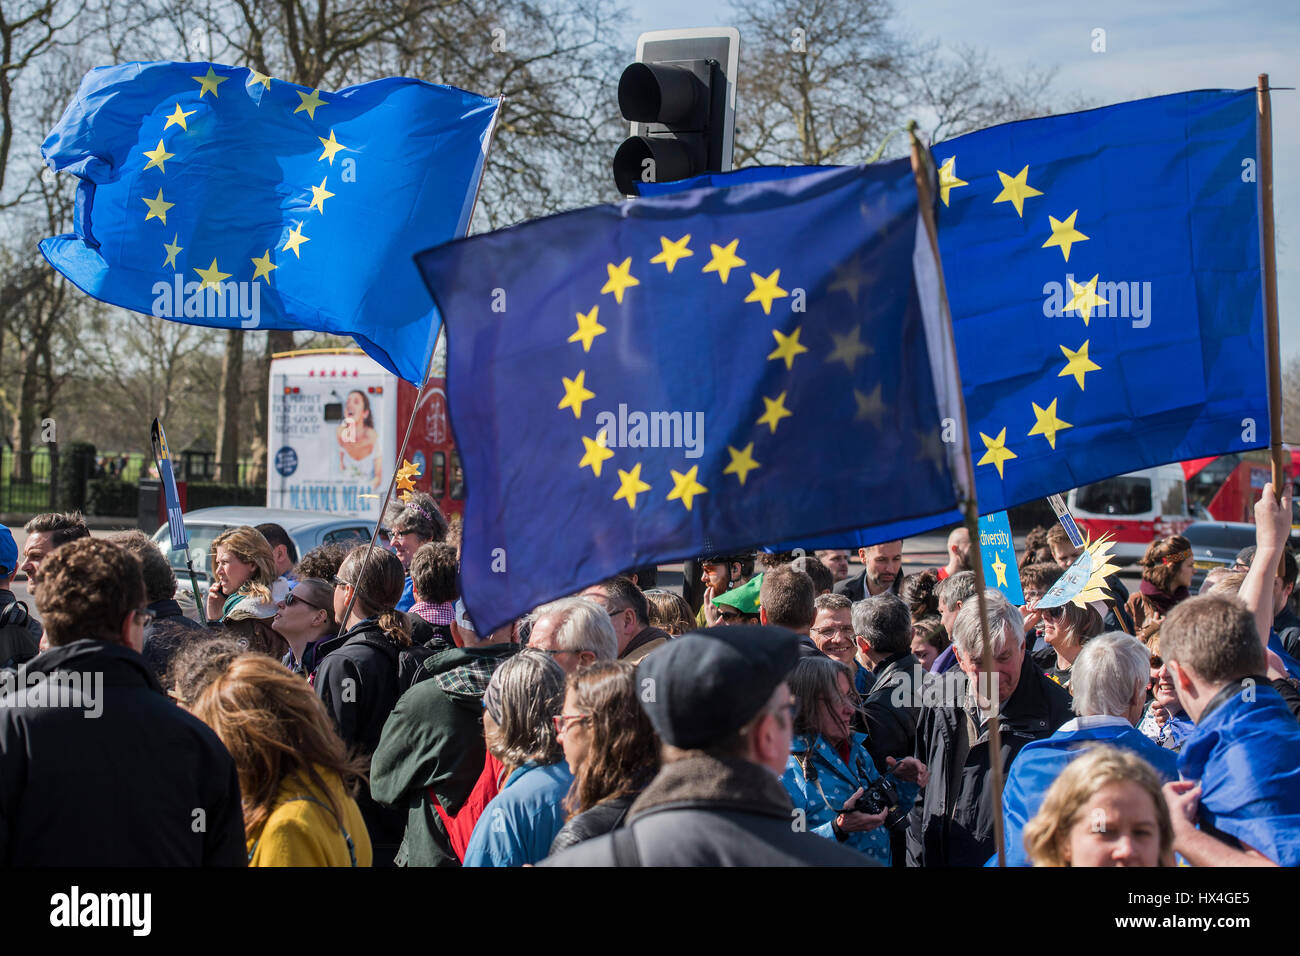 London, UK. 25th March, 2017. Unite for Europe march attended by thousands on the weekend before Theresa May triggers article 50. The march went from Park Lane via Whitehall and concluded with speeches in Parliament Square. London 25 Mar 2017 Credit: Guy Bell/Alamy Live News Stock Photo